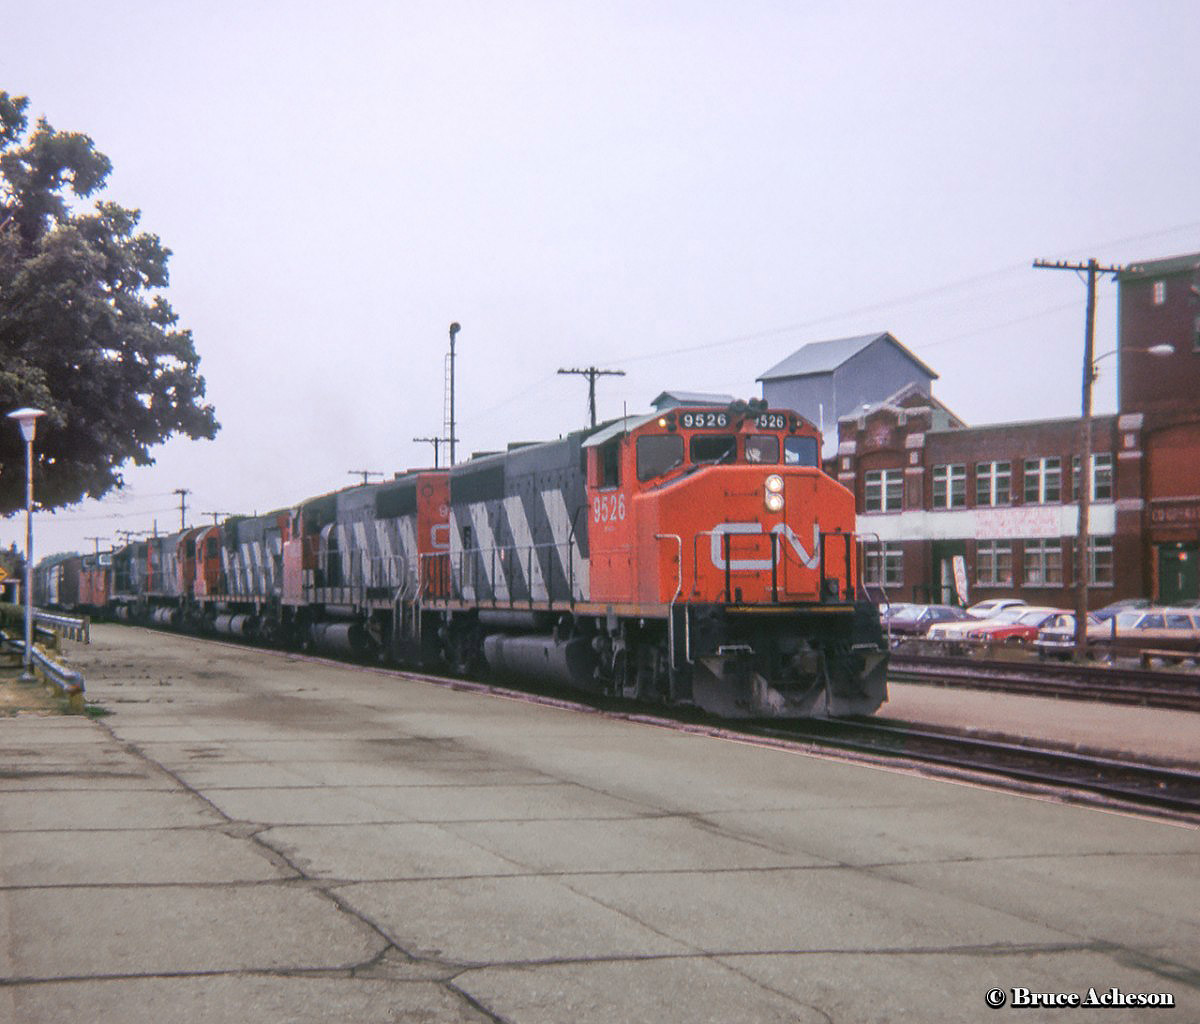 Westbound CN 431 rolls through Guelph station behind a pair of GMD GP40-2LWs, a pair of MLW bigs and another geep. Note the two vans on the head of the train, one each from PSC and Hawker-Siddeley.At right, Guelph's Granary Building is seen on Farquhar Street shortly before restoration. Built as a wood frame structure in 1858 by Toronto-based distiller Gooderham & Worts Limited, the granary was used for storing threshed grain prior to shipment over the Grand Trunk to Toronto. In 1914 the building was covered with bricks to extend the life of the structure, today holding the title of Guelph's oldest industrial building. Numerous industries used the site over the years, including locally-owned Saillian Rugs Limited, before it fell into disrepair during the 1980s-1990s. Restoration during the late 90s converted the structure into an office complex which today houses the Guelph Chamber of Commerce. This area once included Guelph's first railyard, which beginning circa 1900 included an interchange on Farquhar Street with the Guelph Radial Railway.